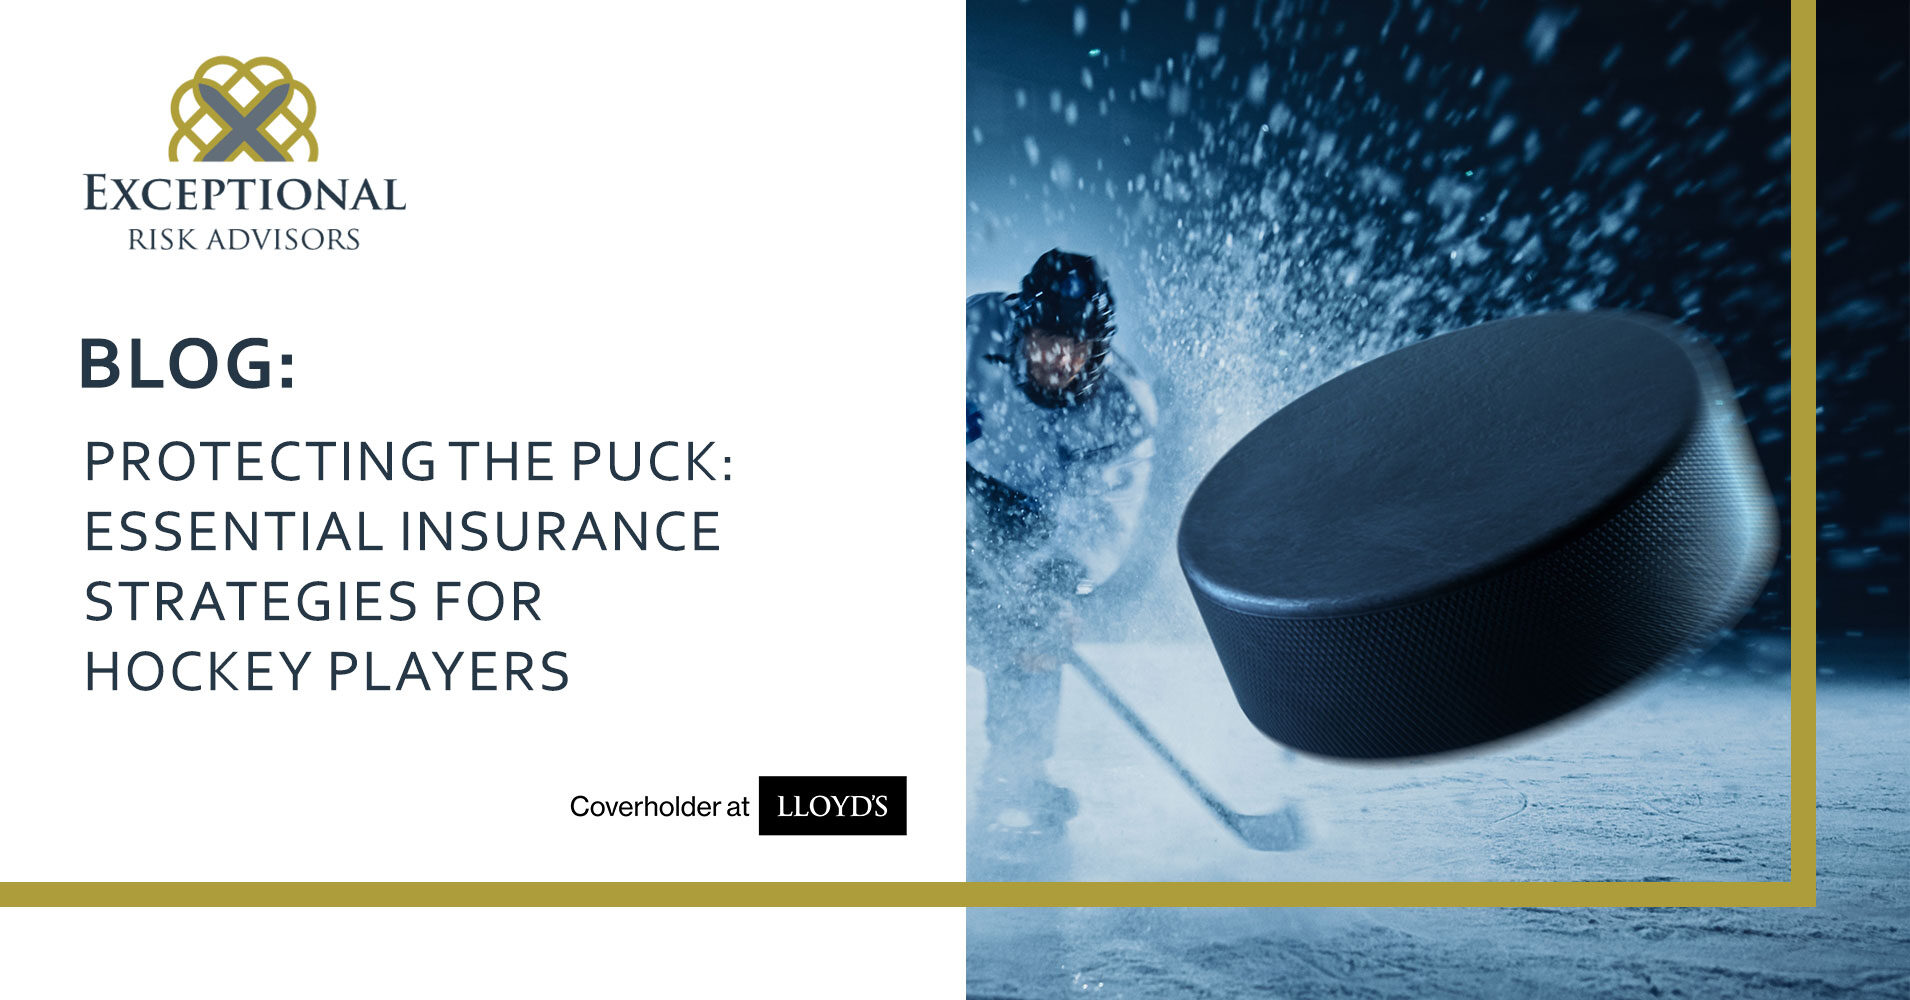 Protecting the Puck: Essential Insurance Strategies for Hockey Players